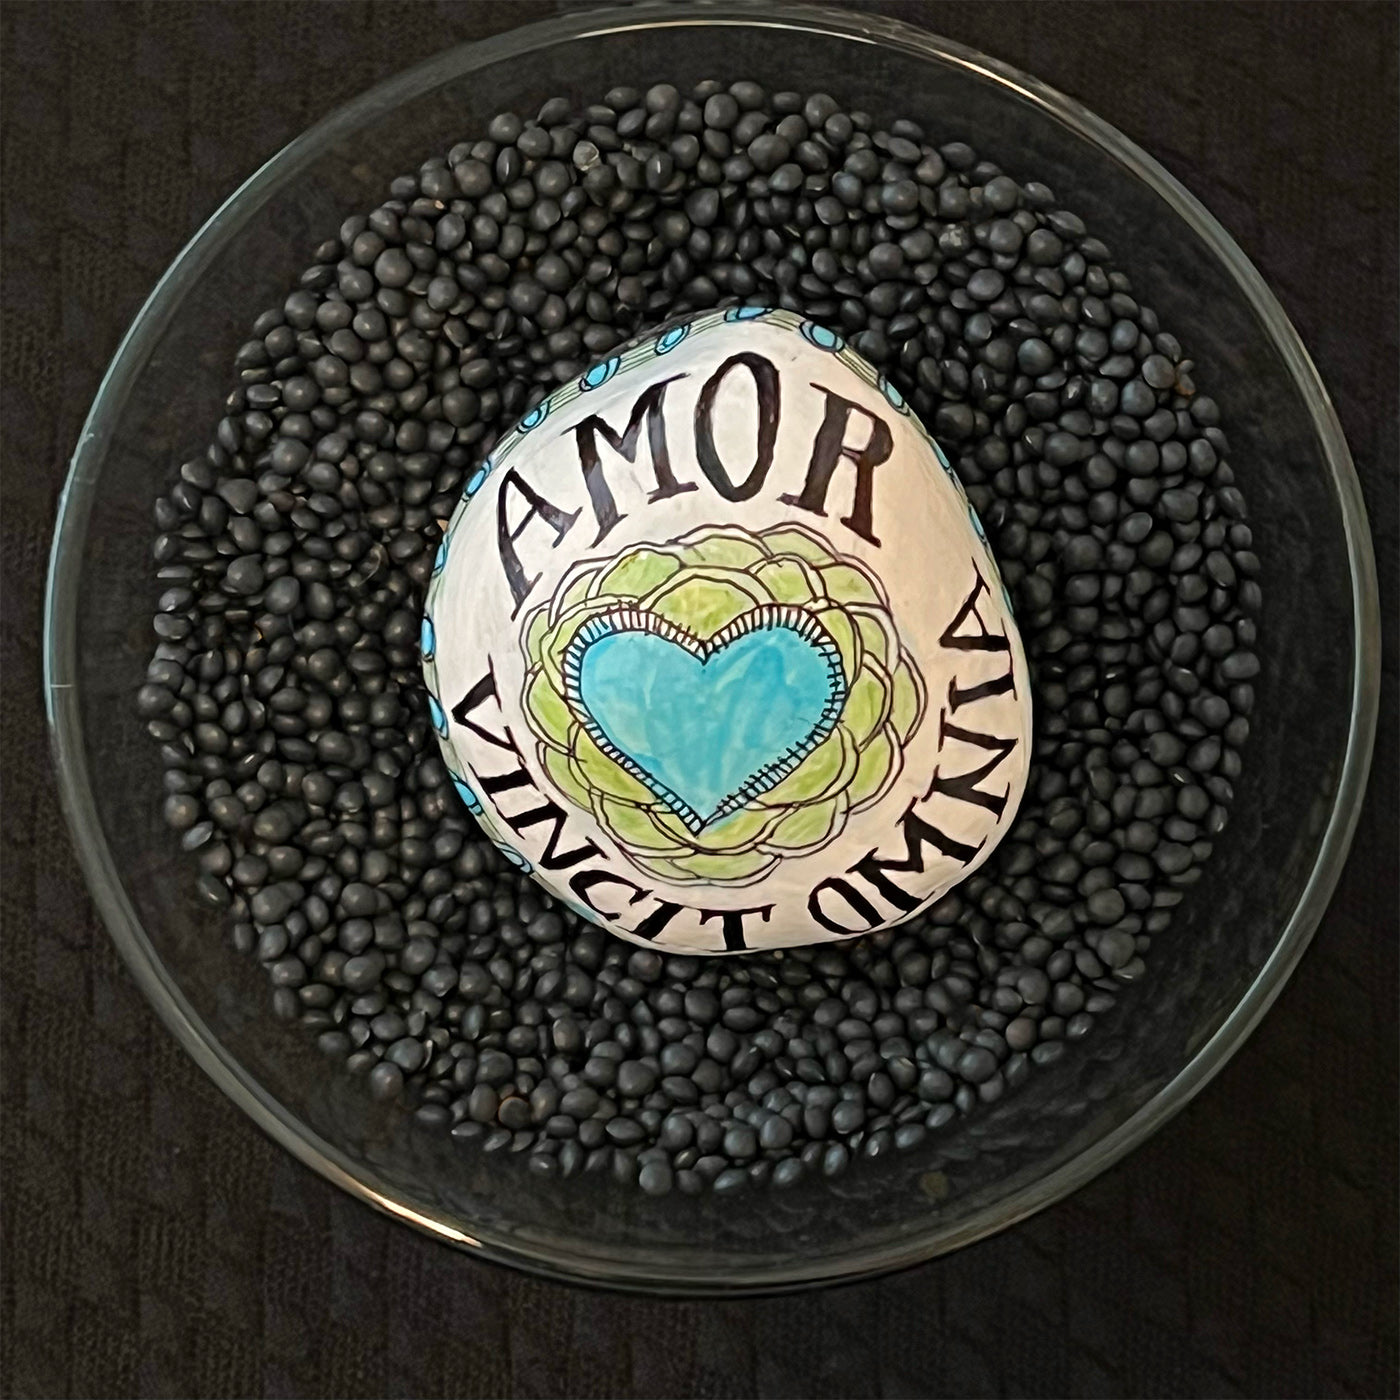 Hand painted stone - "Love Conquers All"